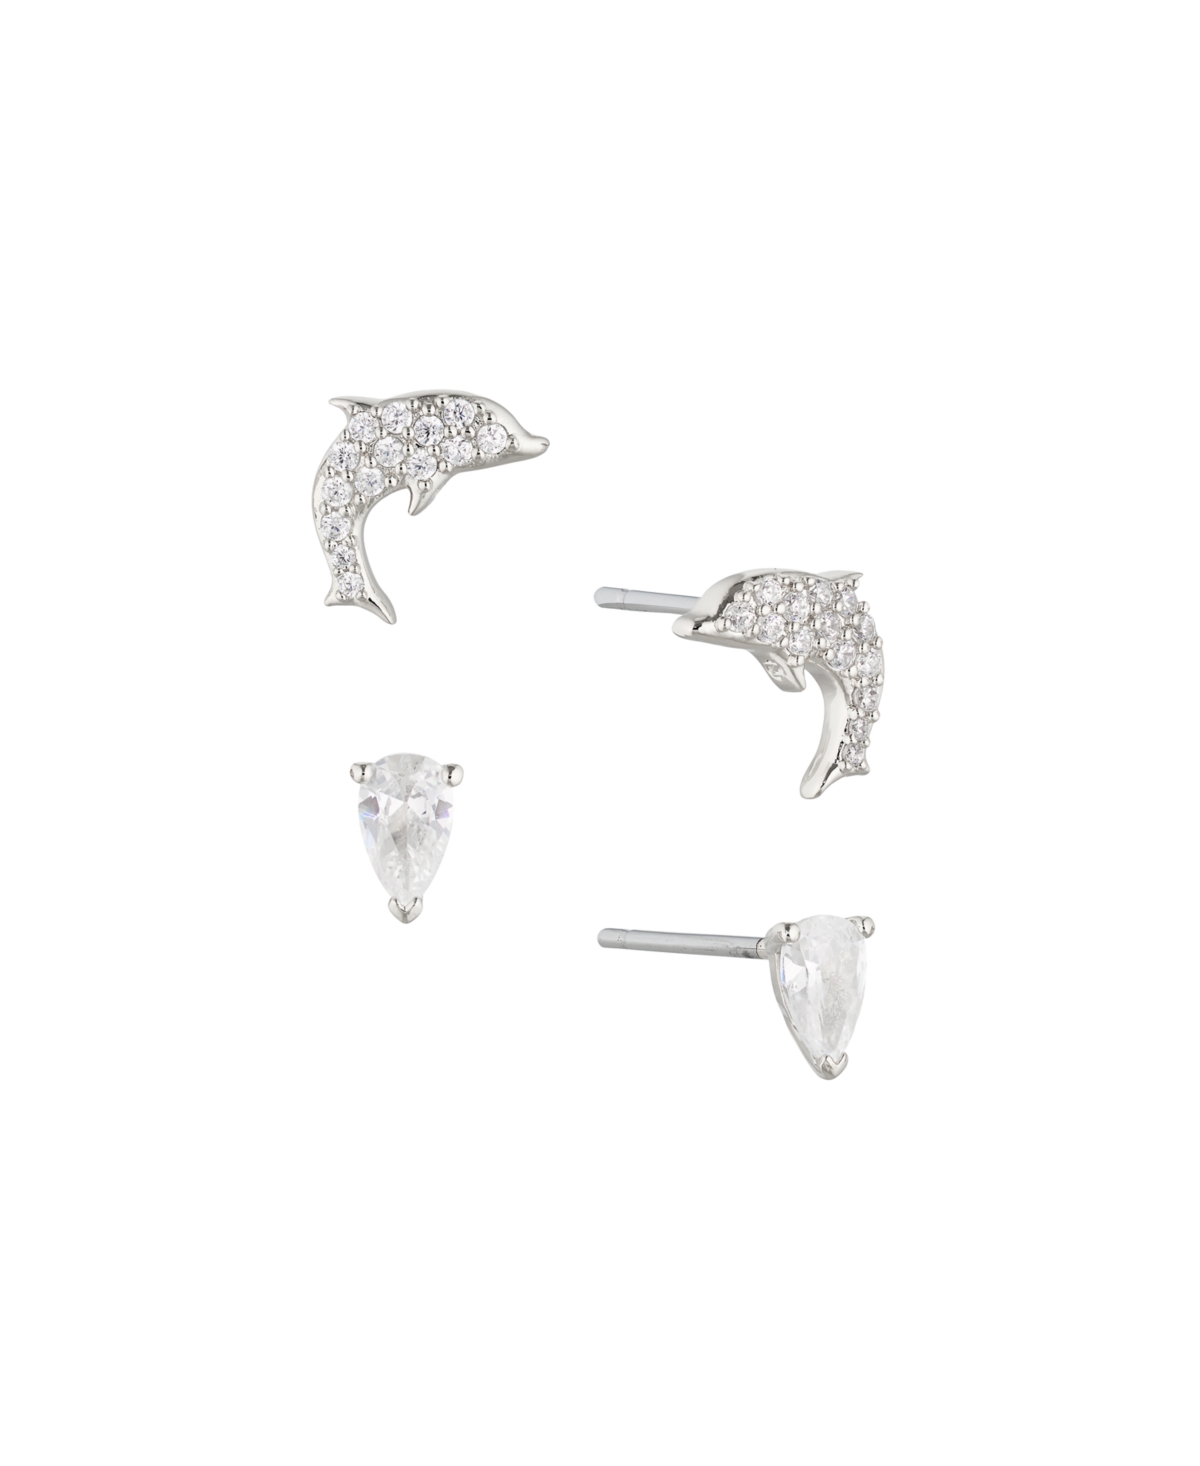 Ava Nadri Rhodium Cubic Zirconia Dolphin Style And Pear Shaped Stud Earrings Set Of Two Pair In Metallic